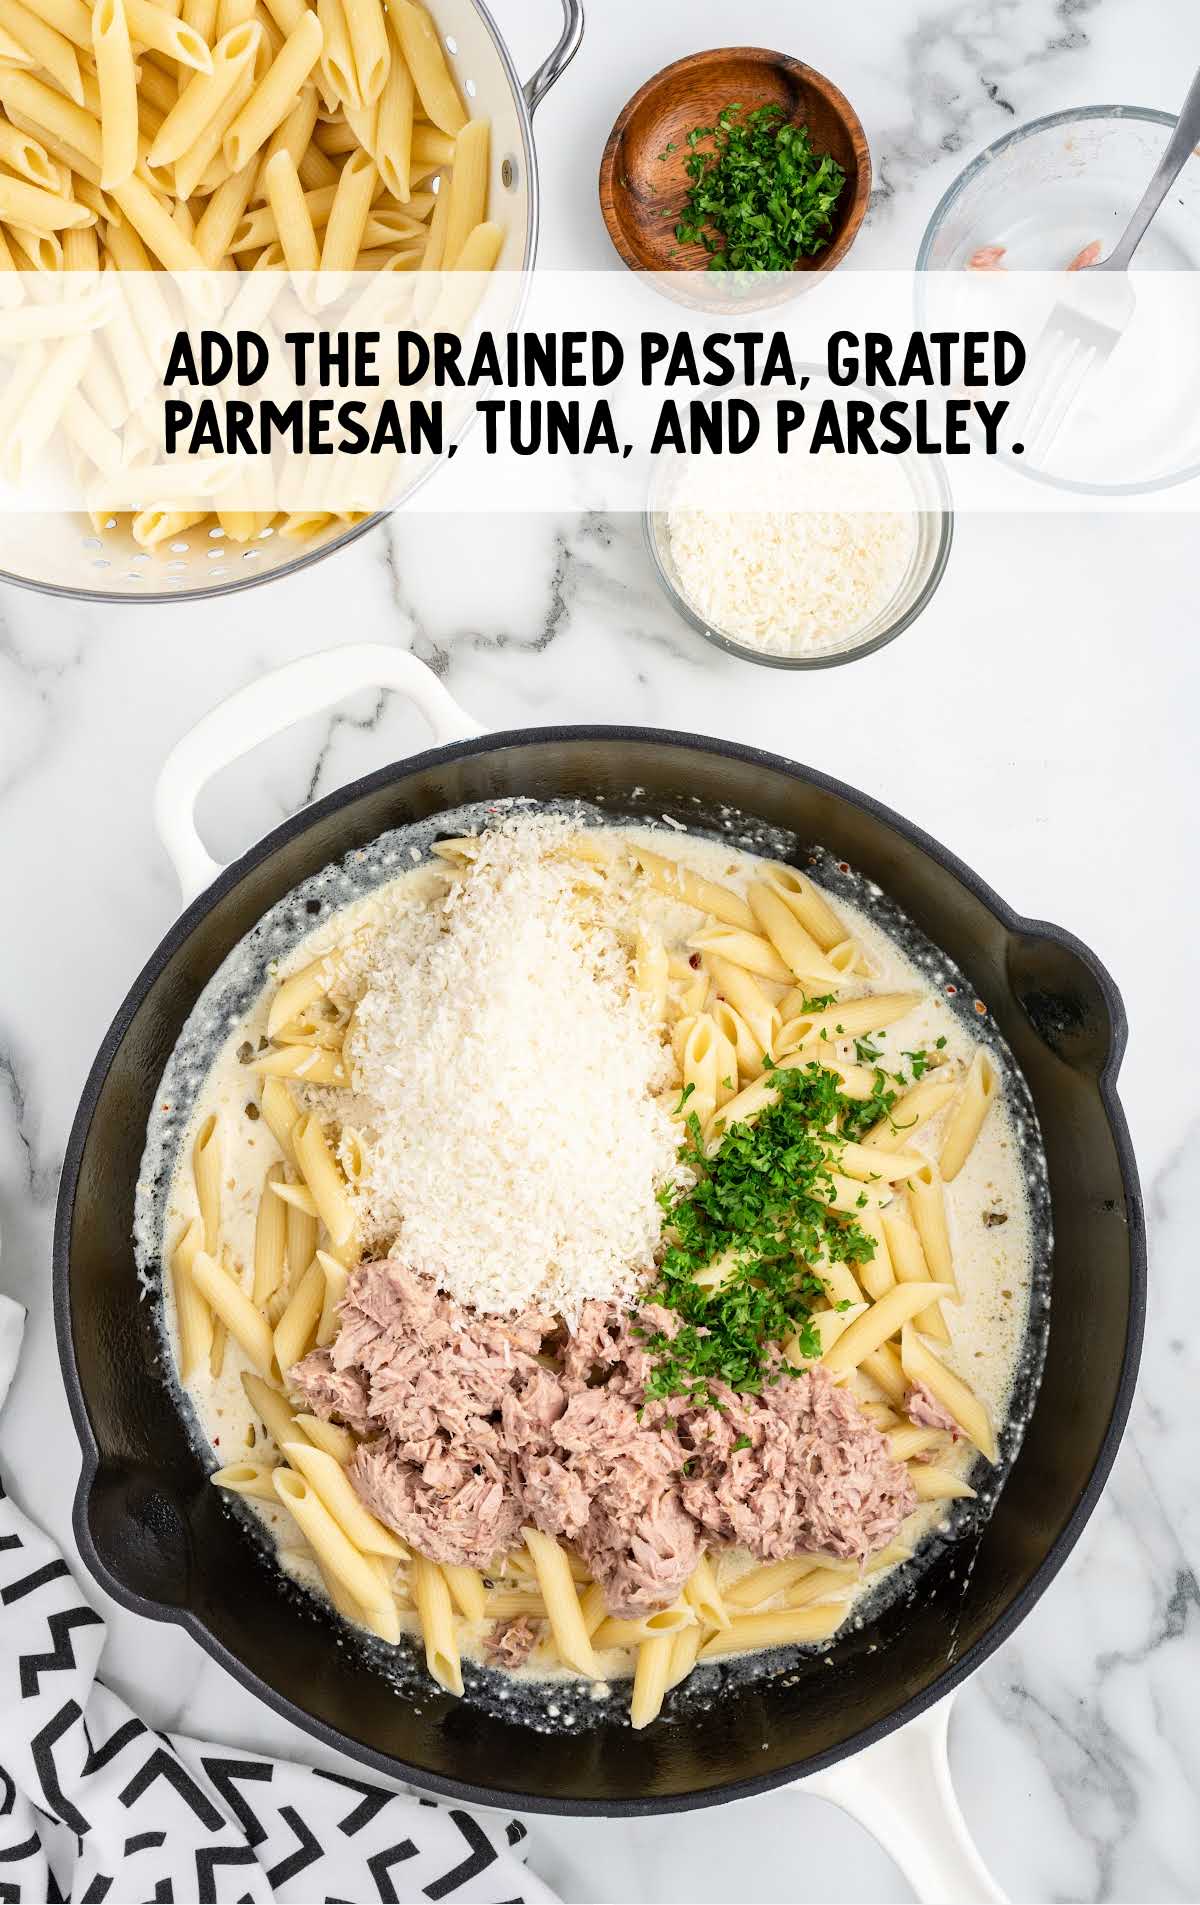 add the rained cooked pasta, grated parmesan cheese, drained canned tuna, and chopped fresh parsley to the pot